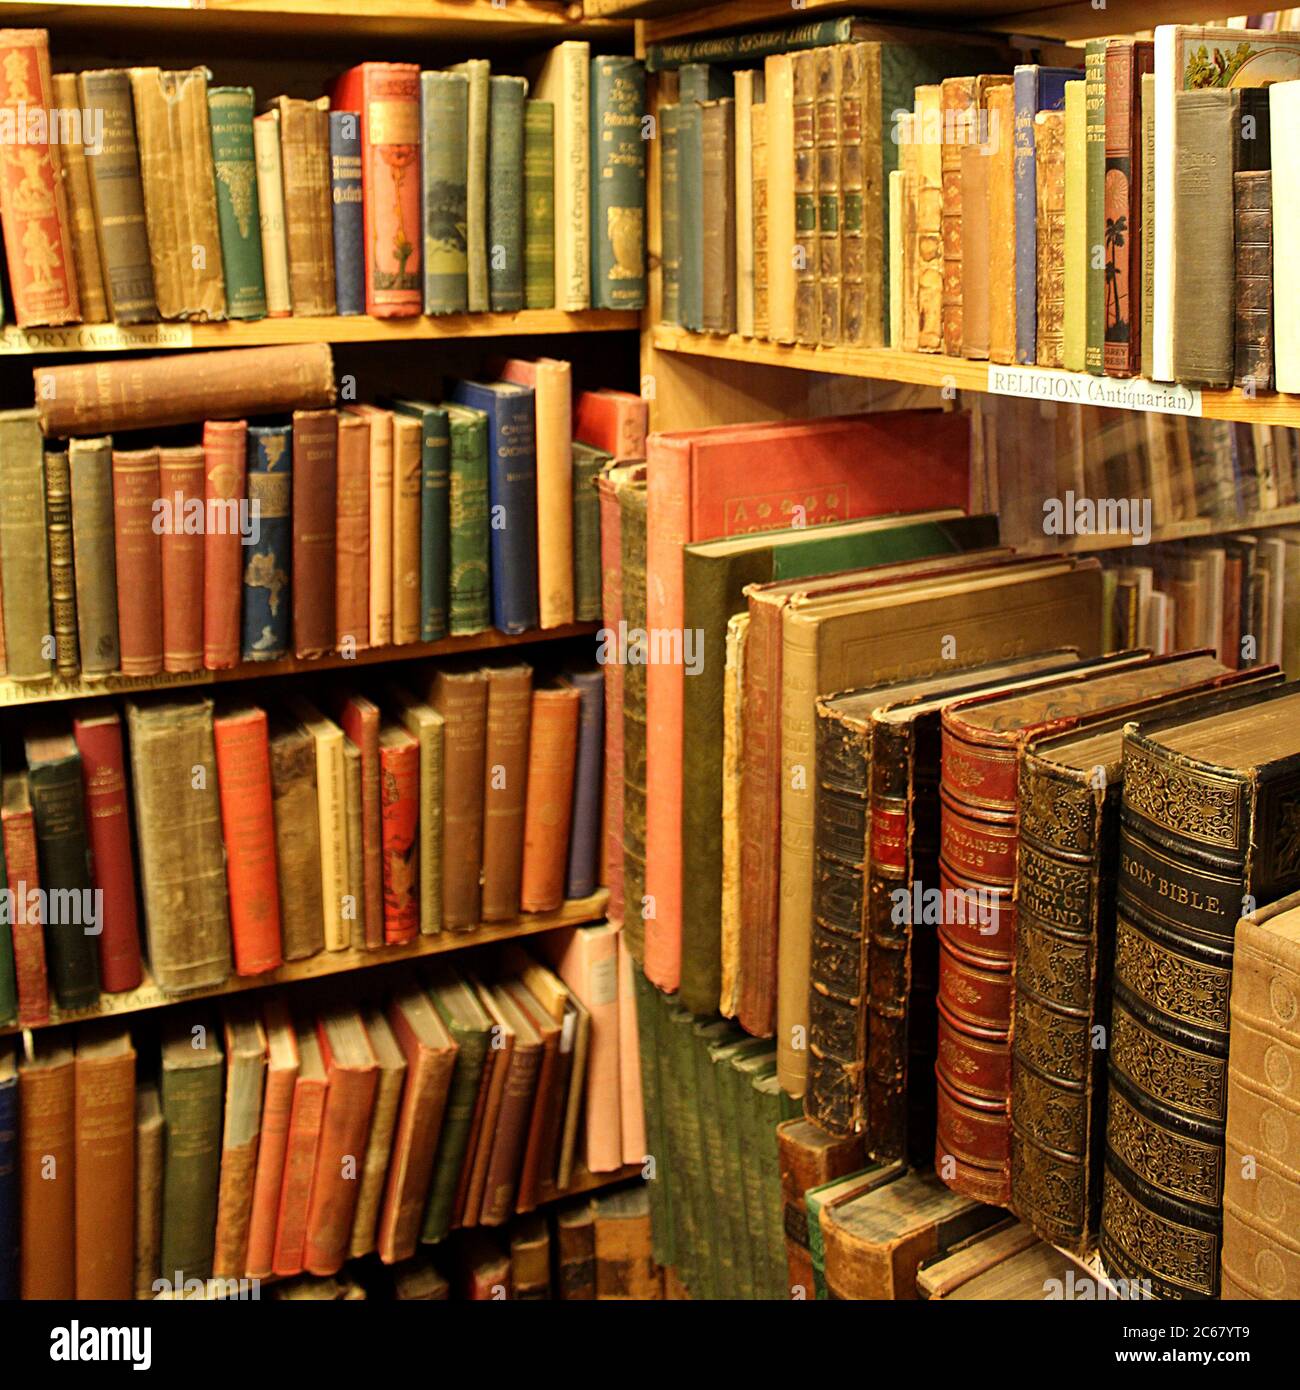 Secondhand and antiquarian book shop Armchair Books in Edinburgh's West  Port, book shelves with religious literature and old copy of The Holy Bible  Stock Photo - Alamy